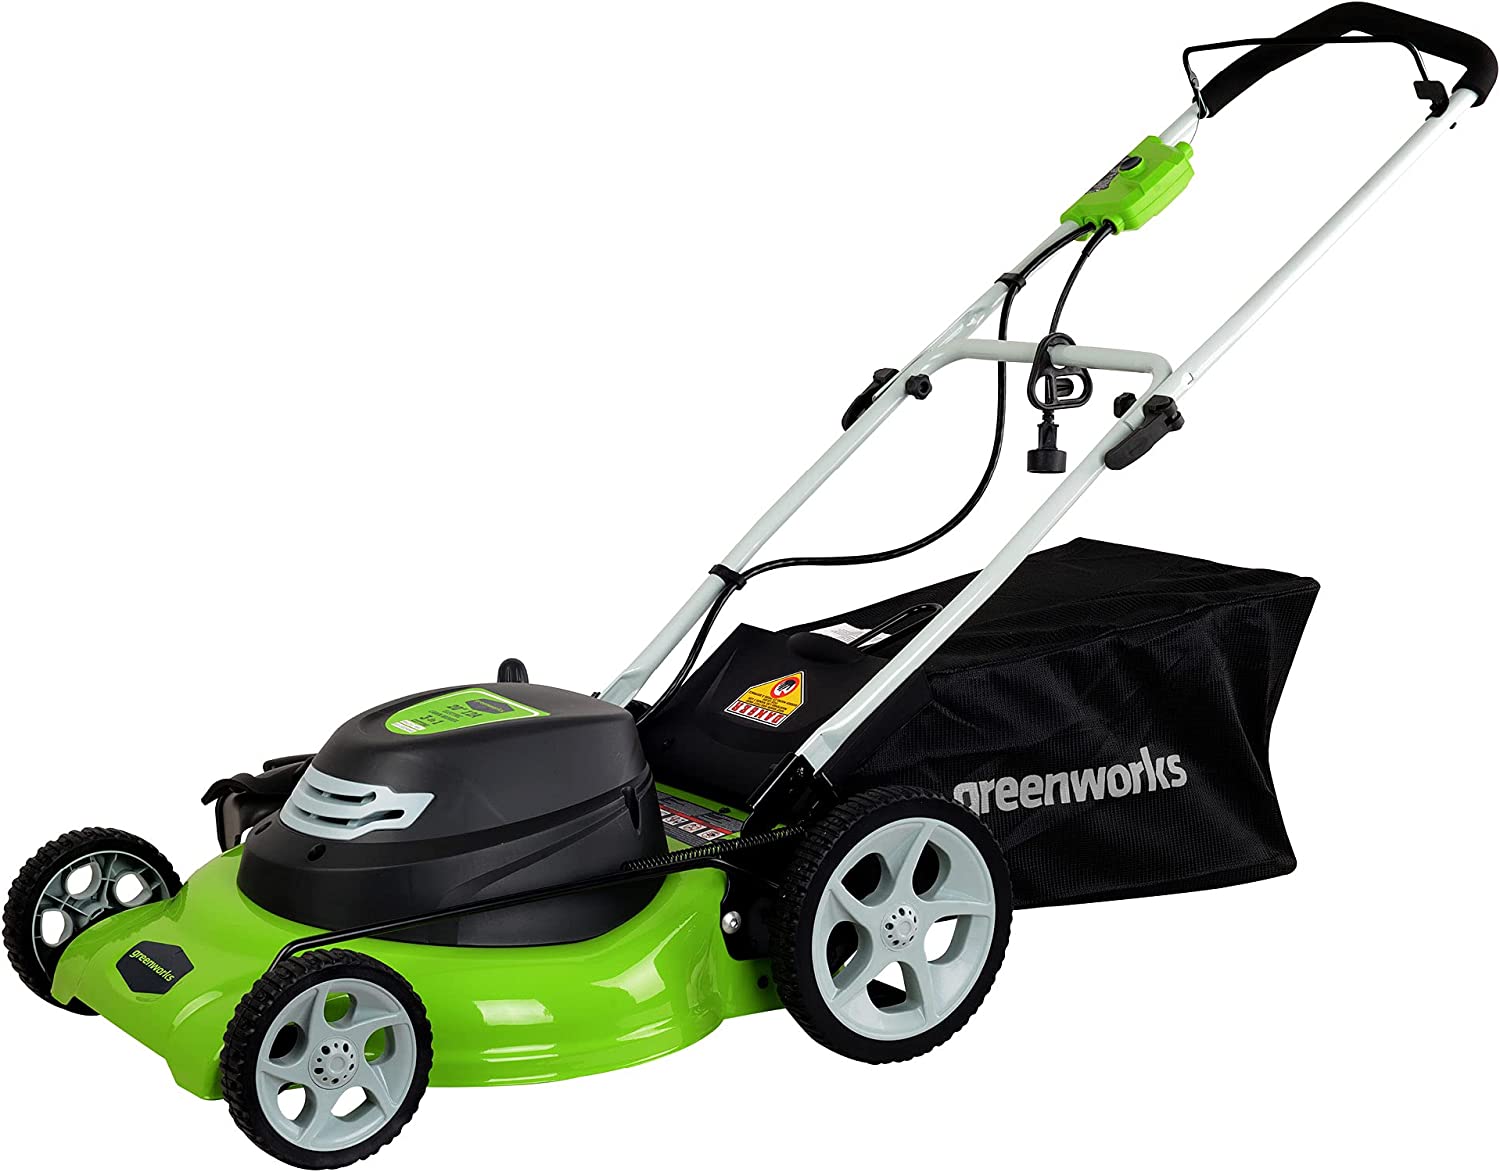 Greenworks 12 Amp 20-Inch 3-in-1Electric Corded Lawn Mower， 25022